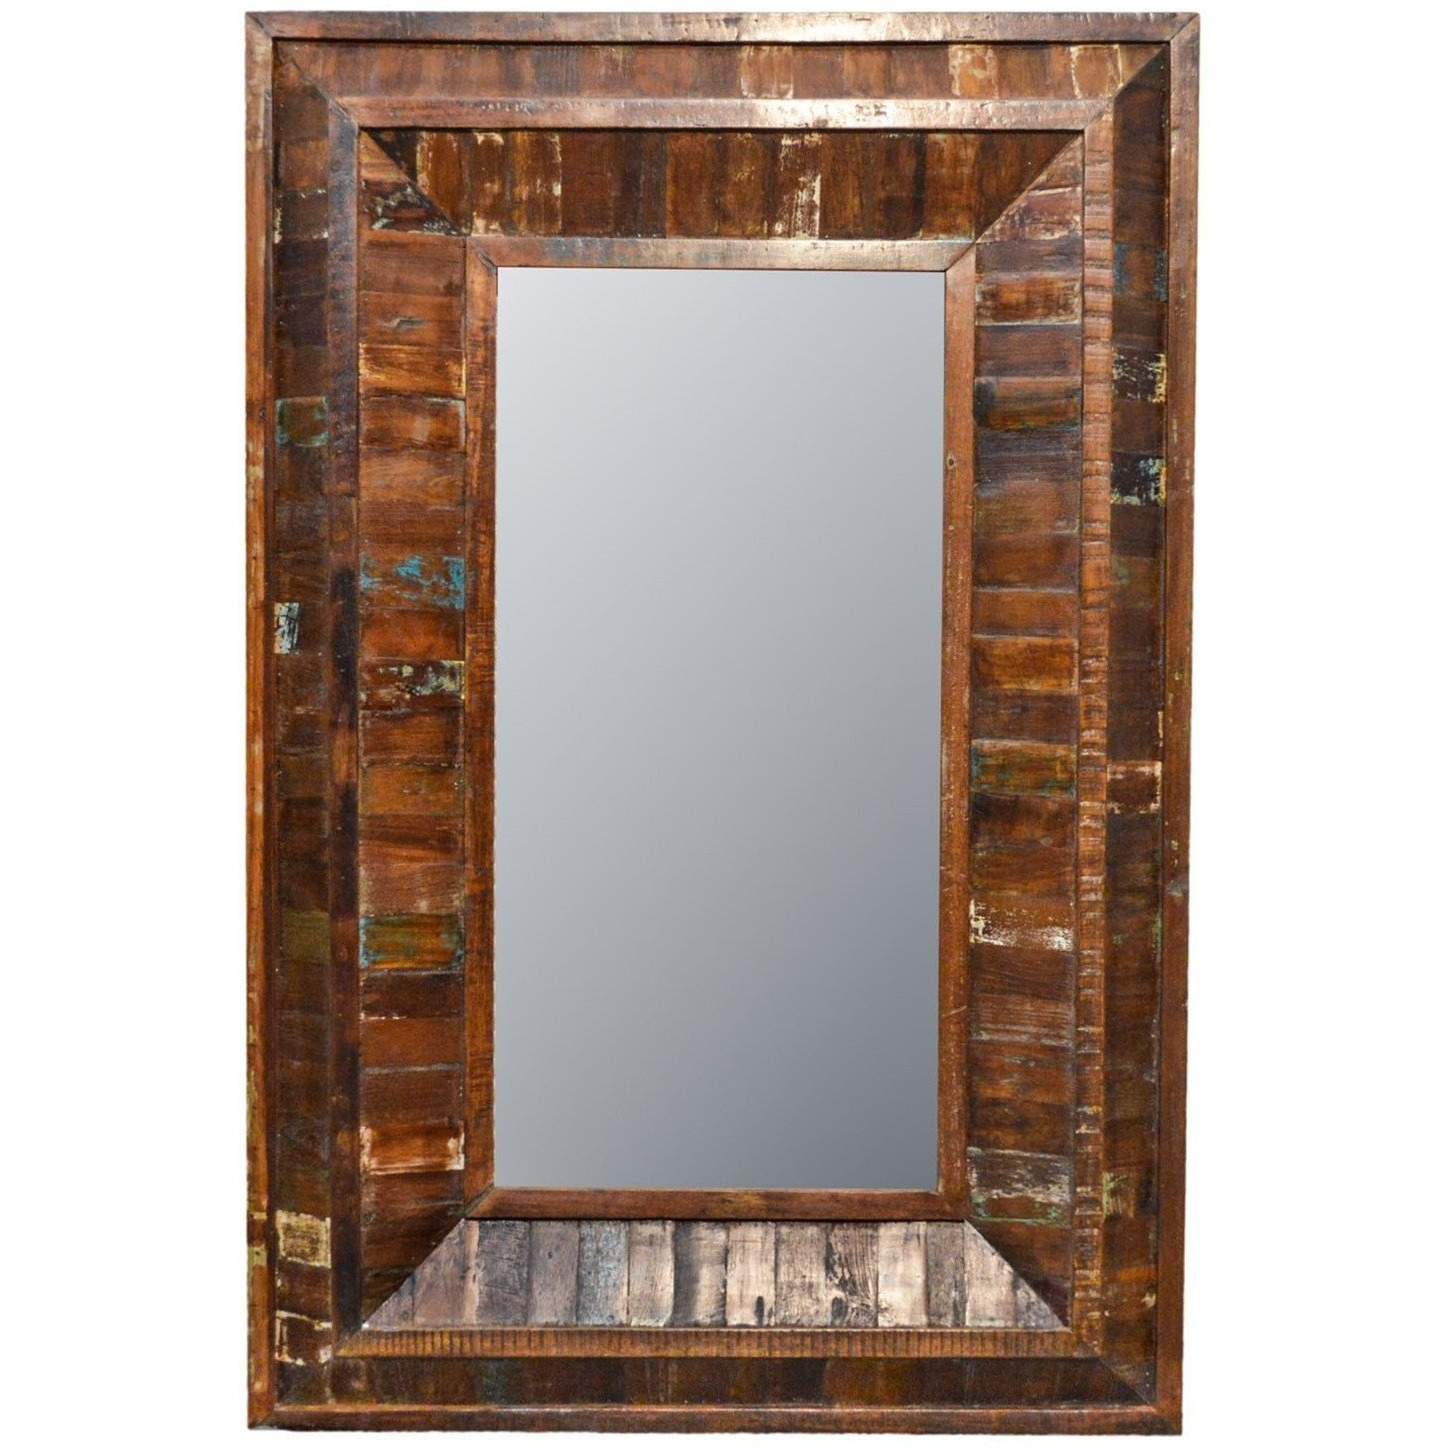 Rustic Reclaimed Rectangle Wooden Mirror 54